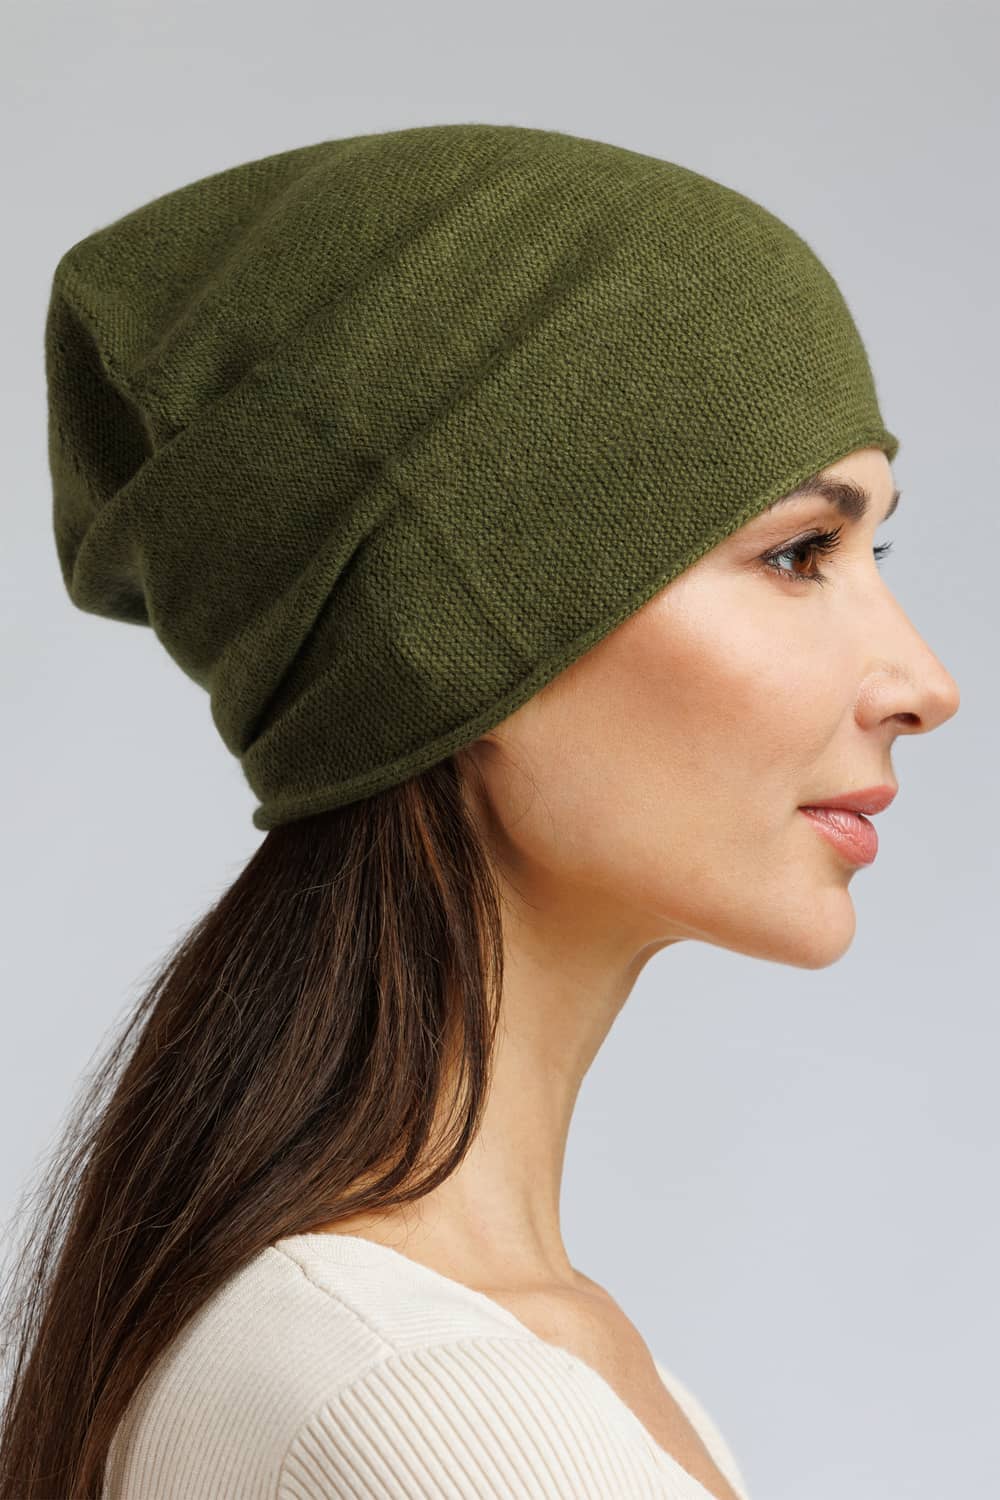 Women's 100% Cashmere Slouchy Beanie Hat Womens>Accessories>Hat Fishers Finery 